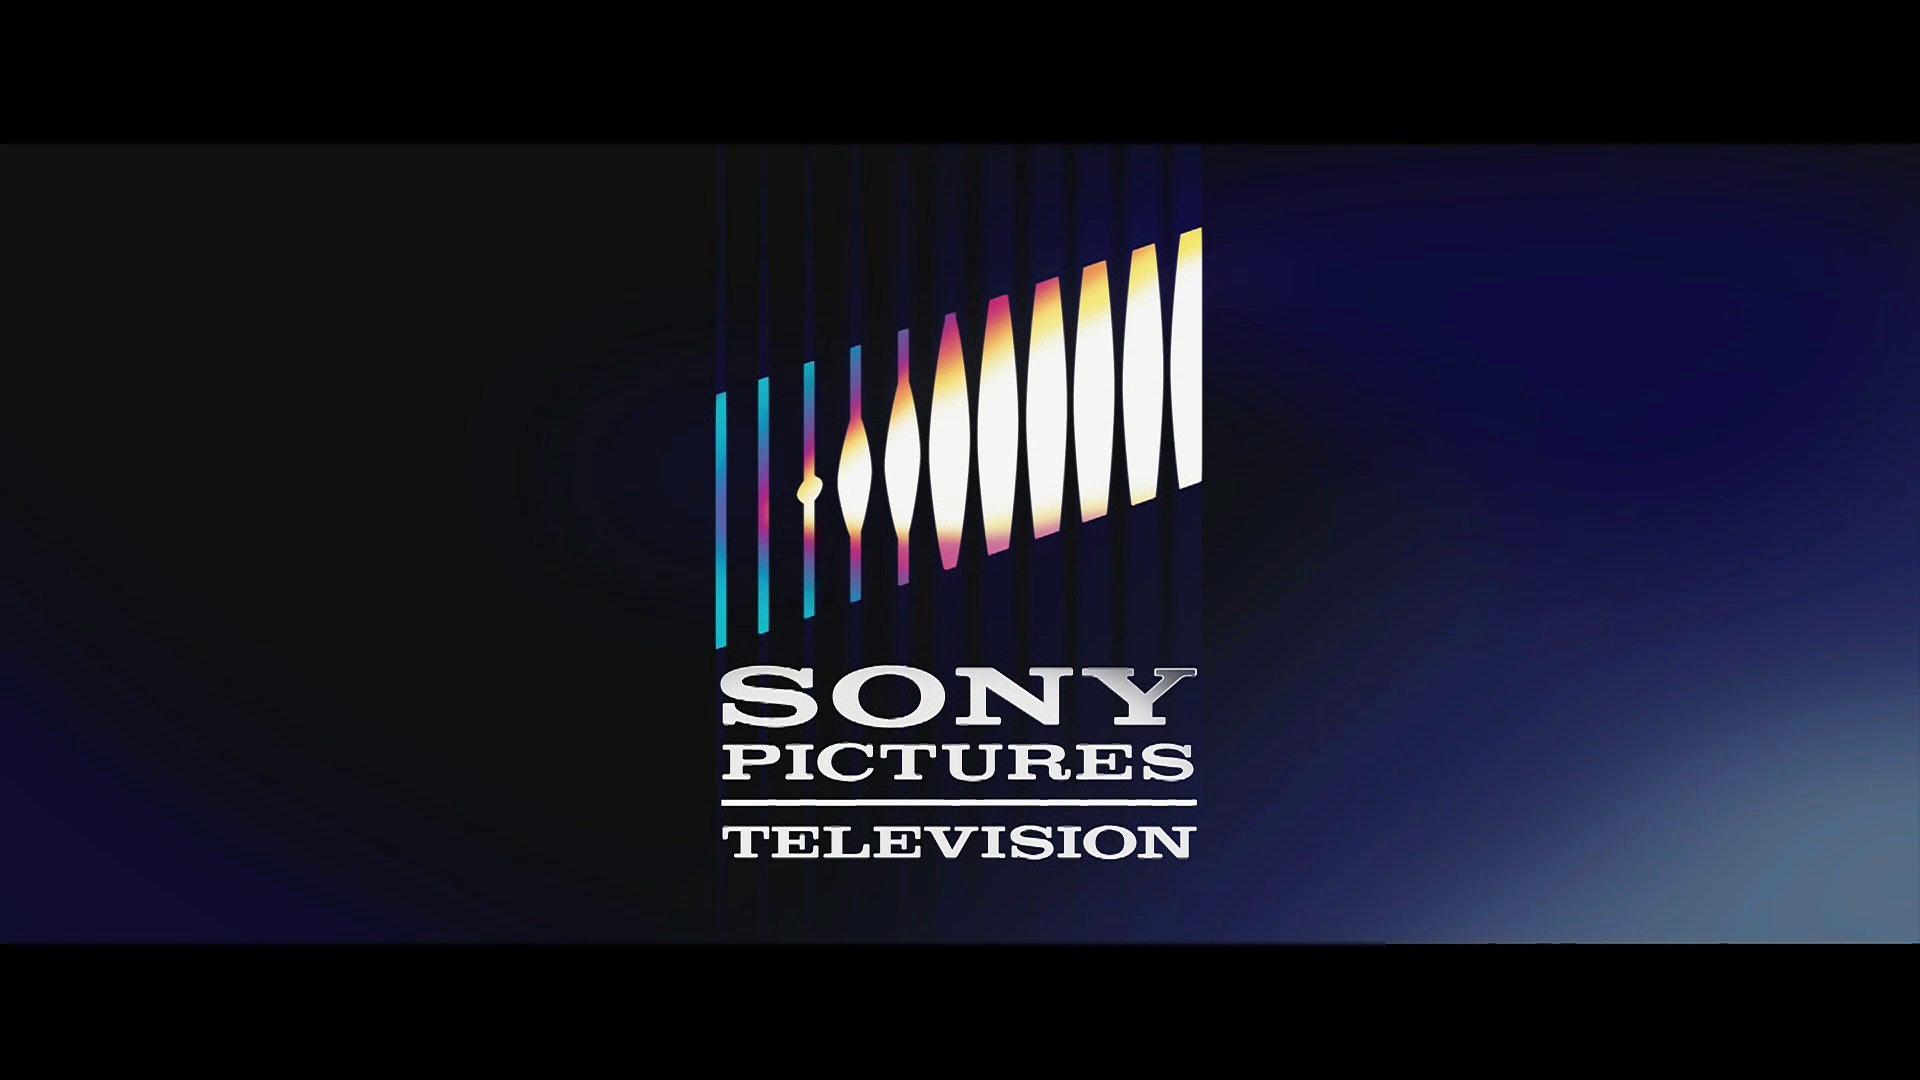 Sony Pictures Television (21:9) (2018)